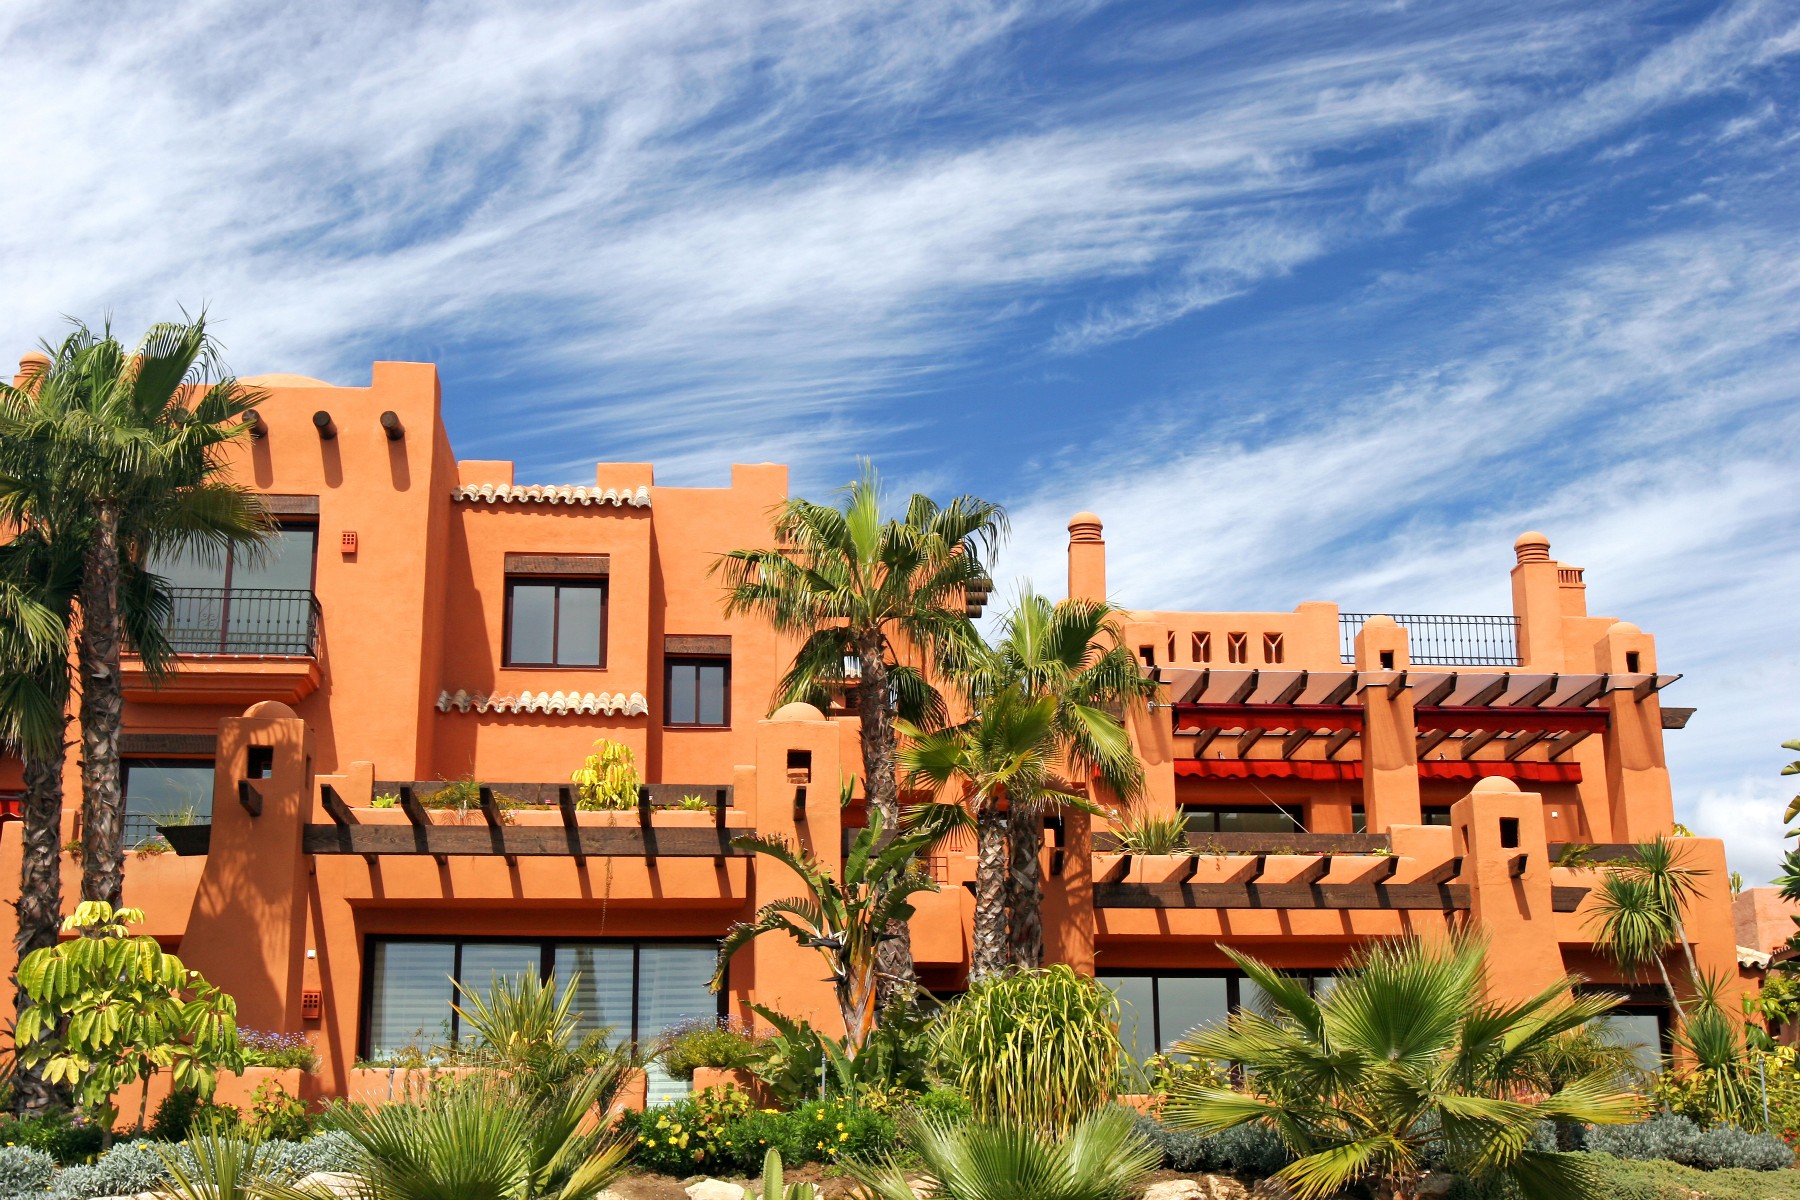 Vibrant houses in Spain with palm trees in front yards